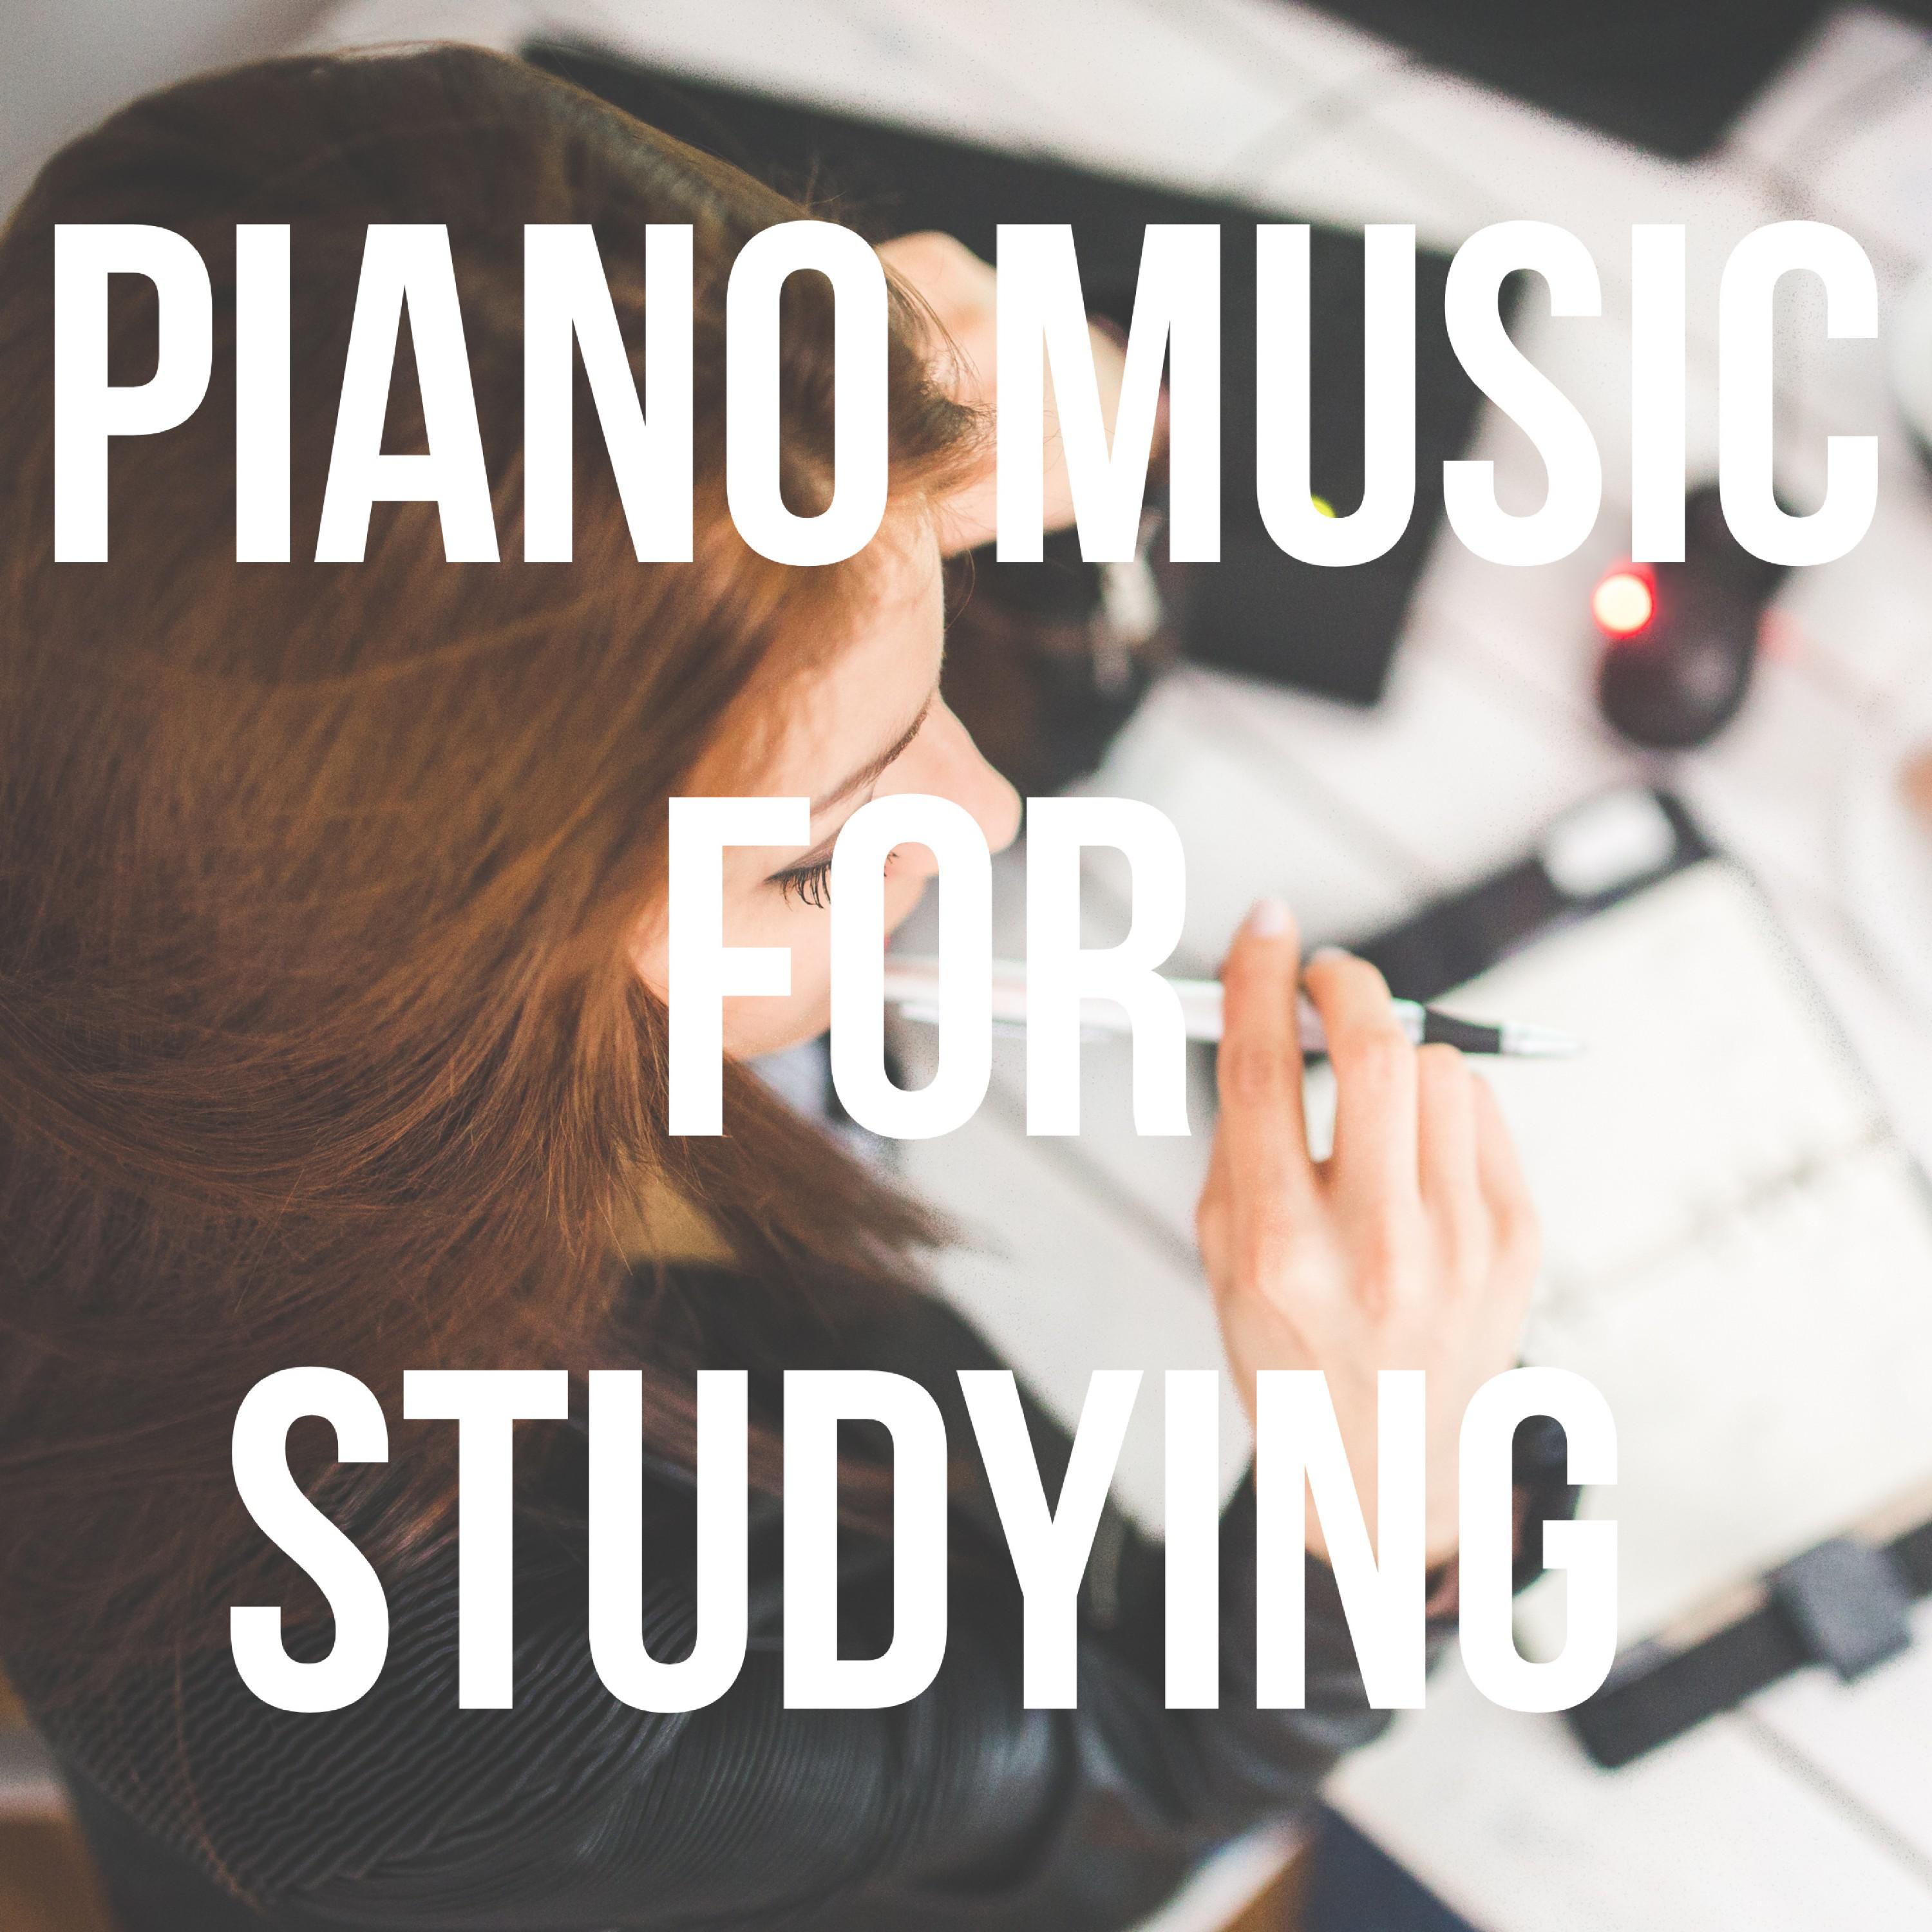 Piano Music for Studying, Concentration, Relaxation, Intense Learning, Deep Focus